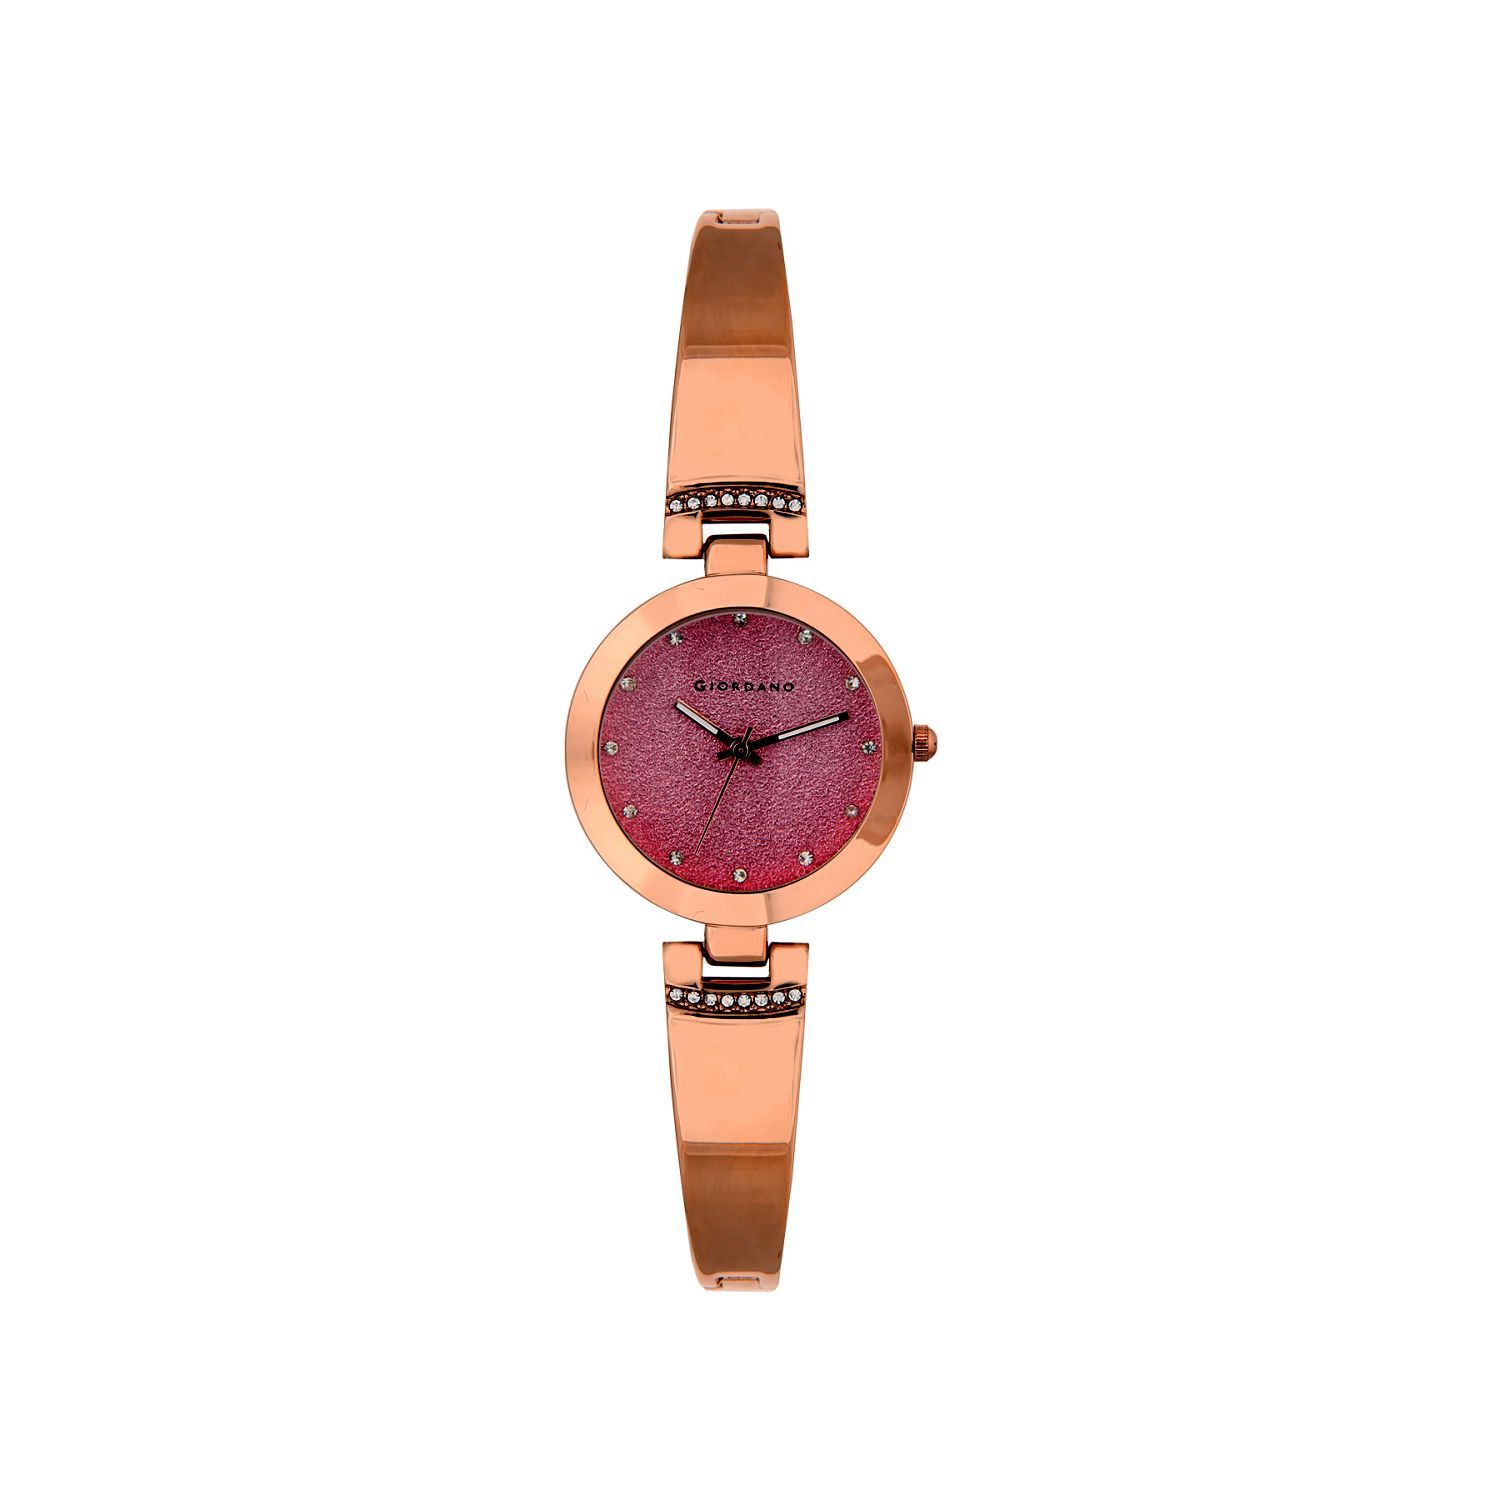 Nykaa Fashion - #BeTheSanta Santa is coming to town and he's bringing with  him elegant wrist watches that make for great gifts. Add these styles to  your cart and discover more at